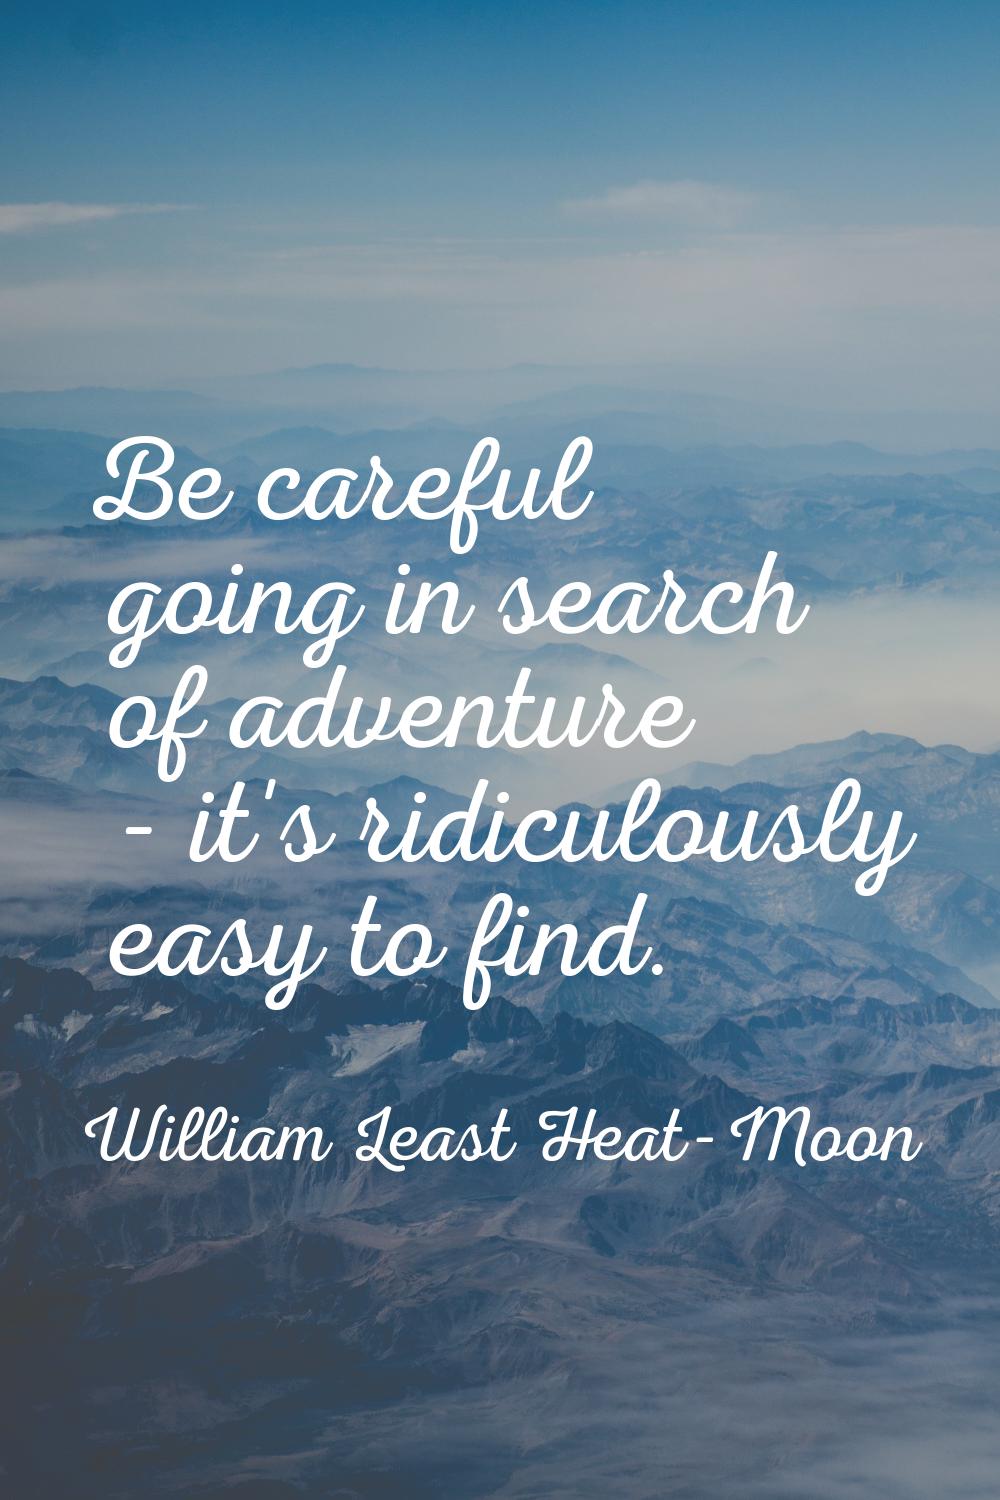 Be careful going in search of adventure - it's ridiculously easy to find.